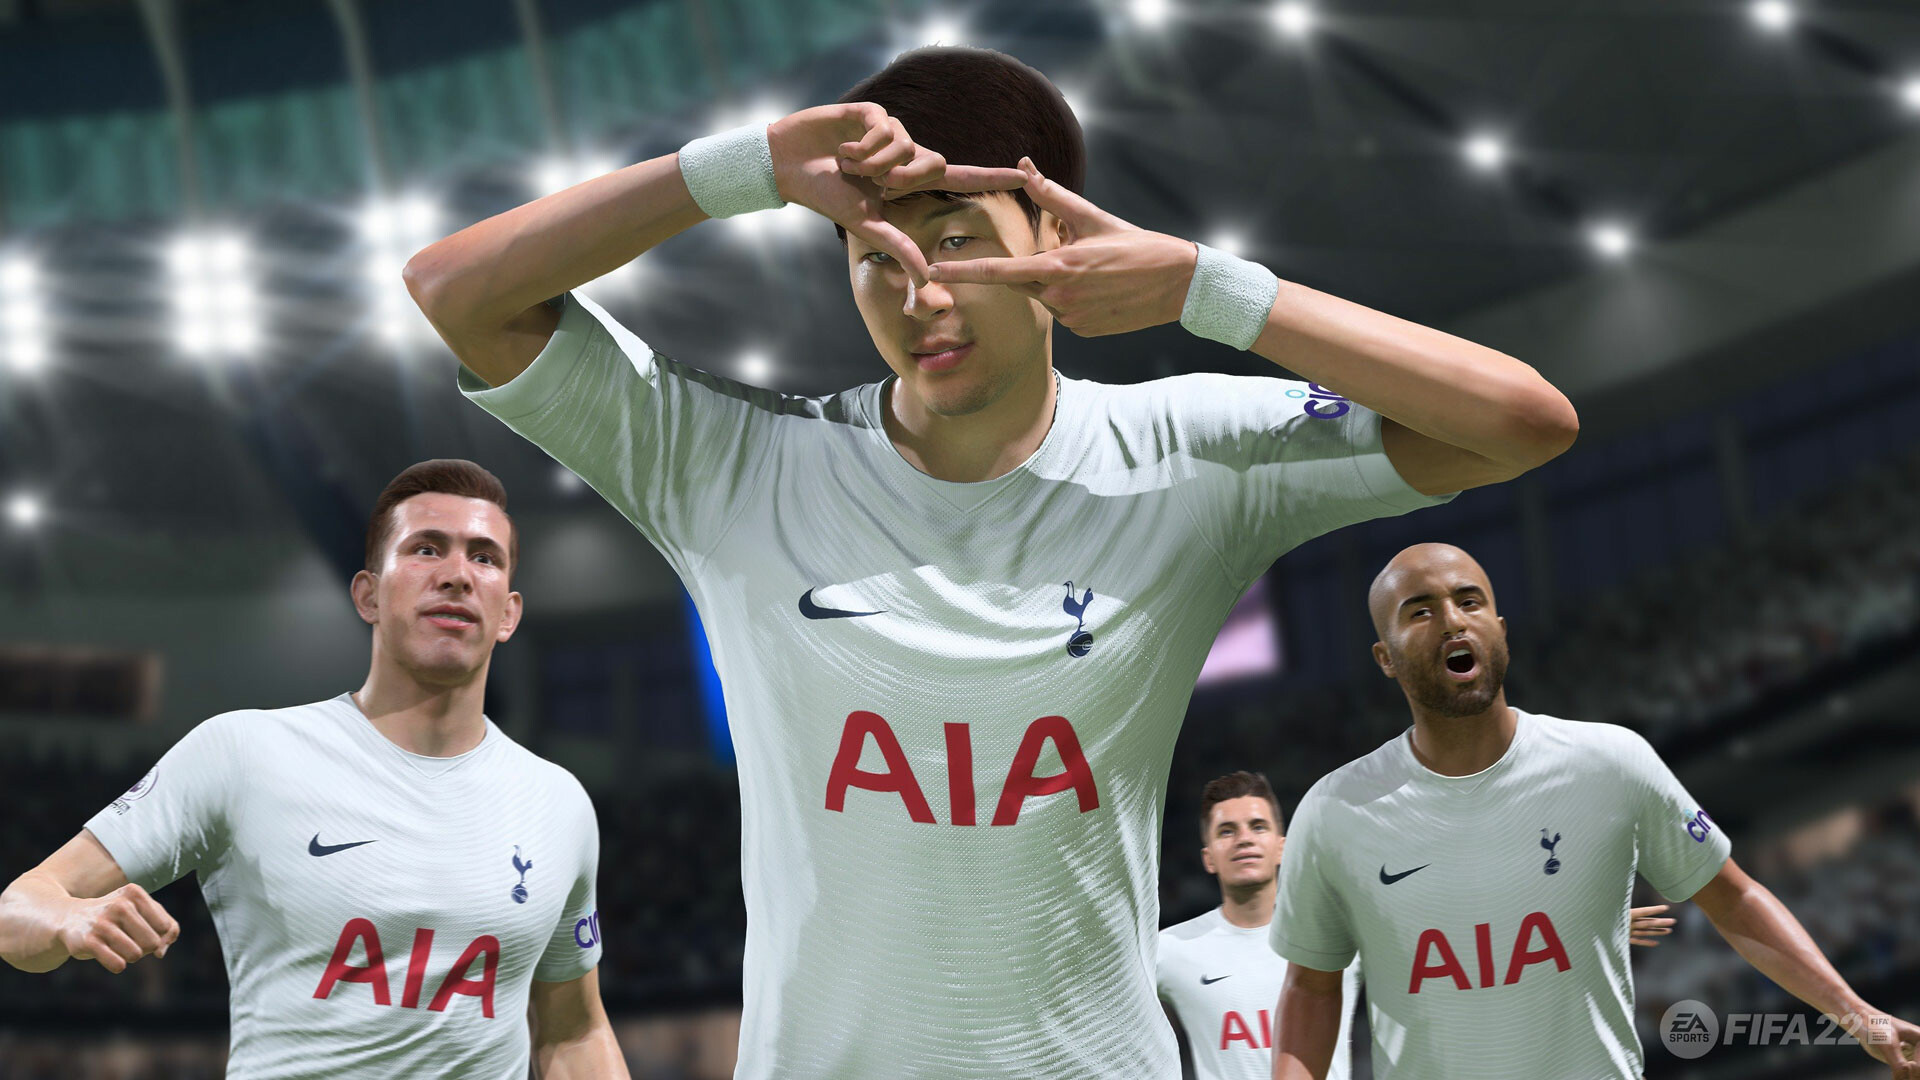 FIFA: The game Introduces "HyperMotion Technology,” which uses motion capture data collected from 22 real-life players. 1920x1080 Full HD Background.